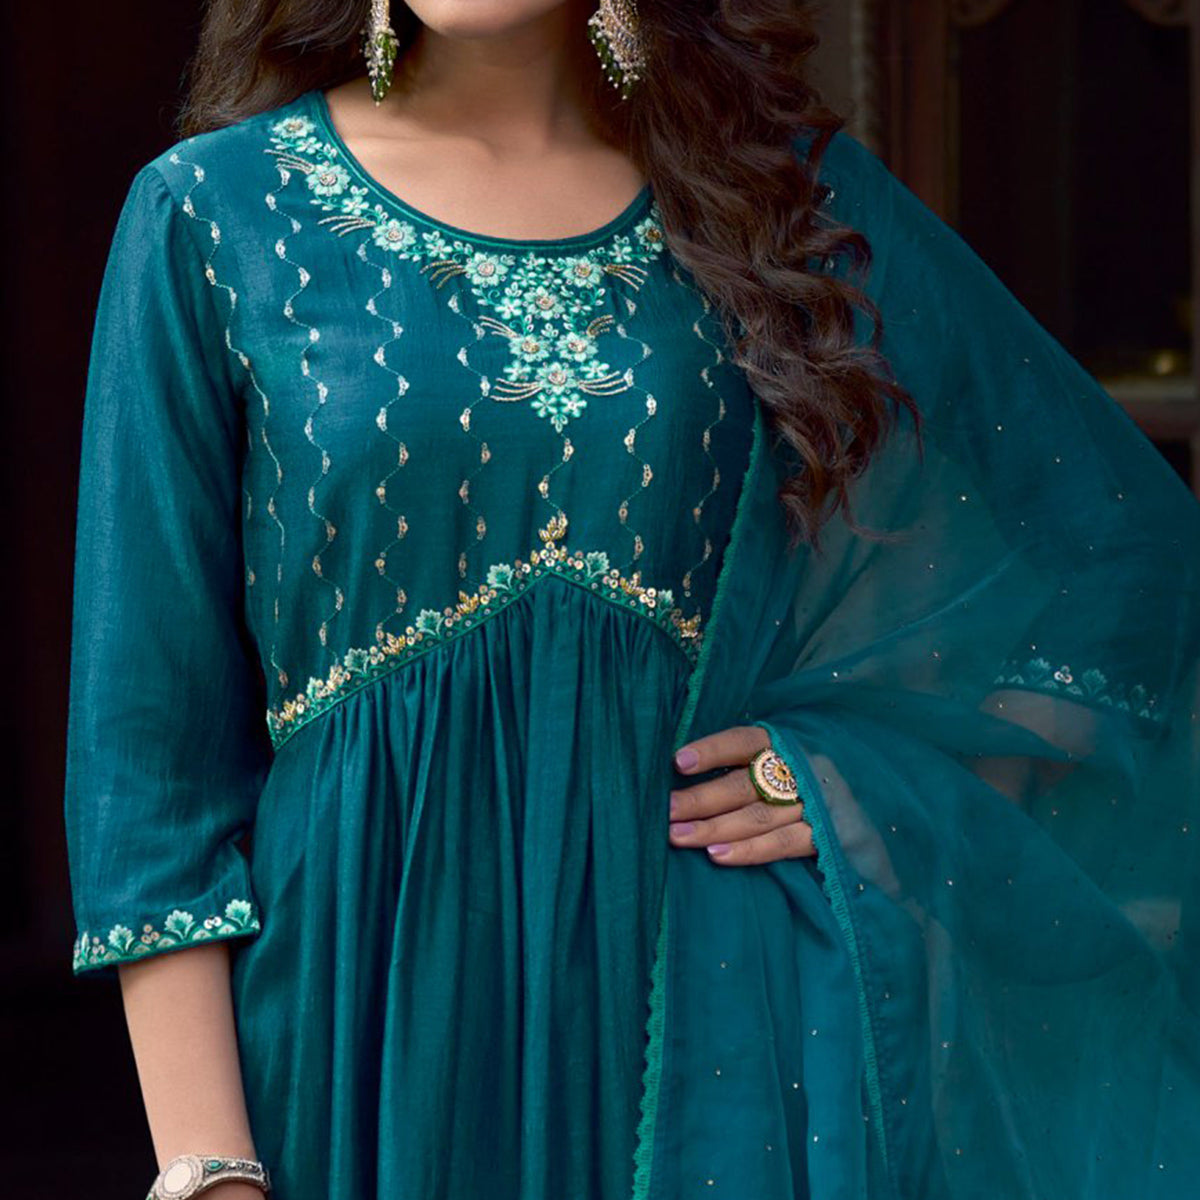 Teal Blue Floral Embroidered Art Silk Naira Cut Suit